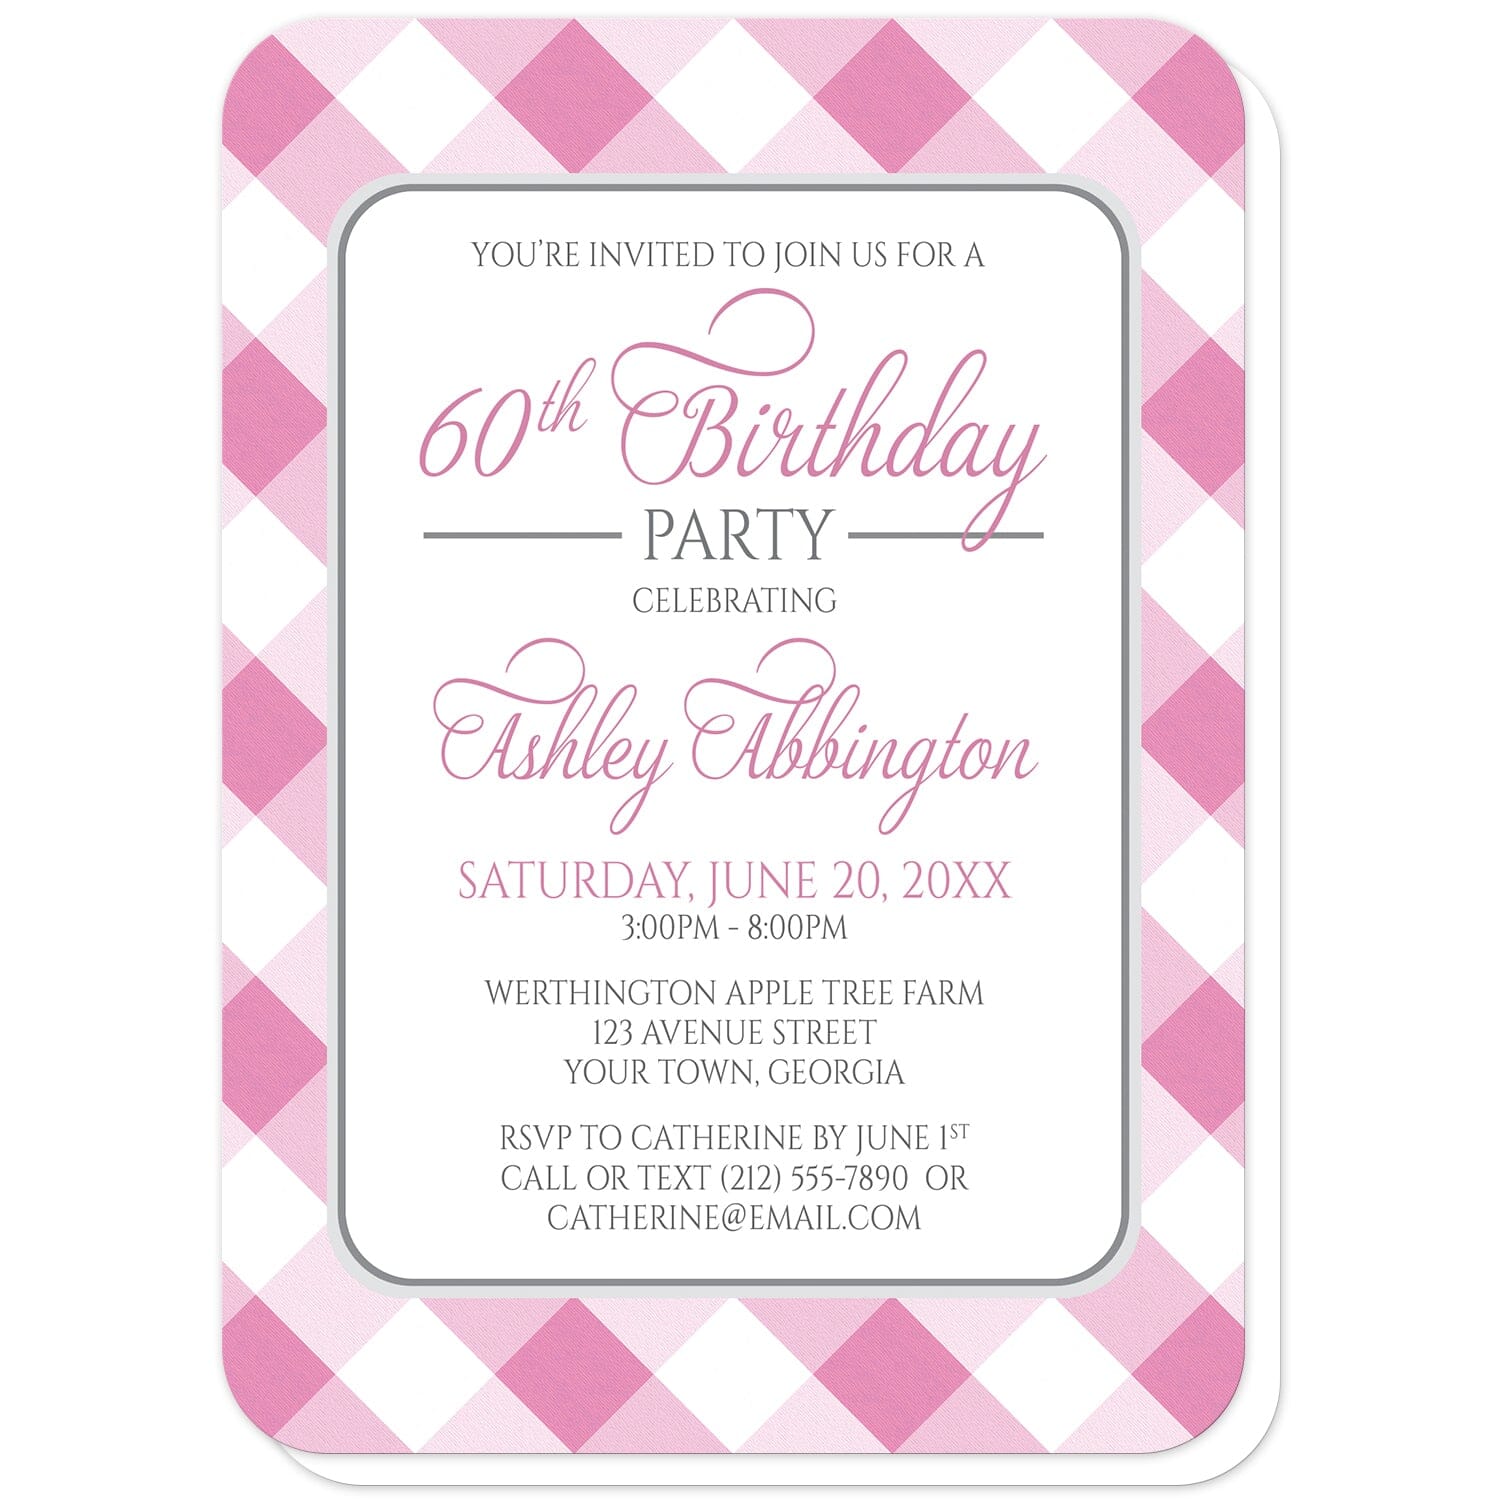 Pink Gingham Birthday Party Invitations (with rounded corners) at Artistically Invited. Pink gingham birthday party invitations with your personalized party details custom printed in pink and gray inside a white rectangular area outlined in gray. The background design is a diagonal pink and white gingham pattern. 